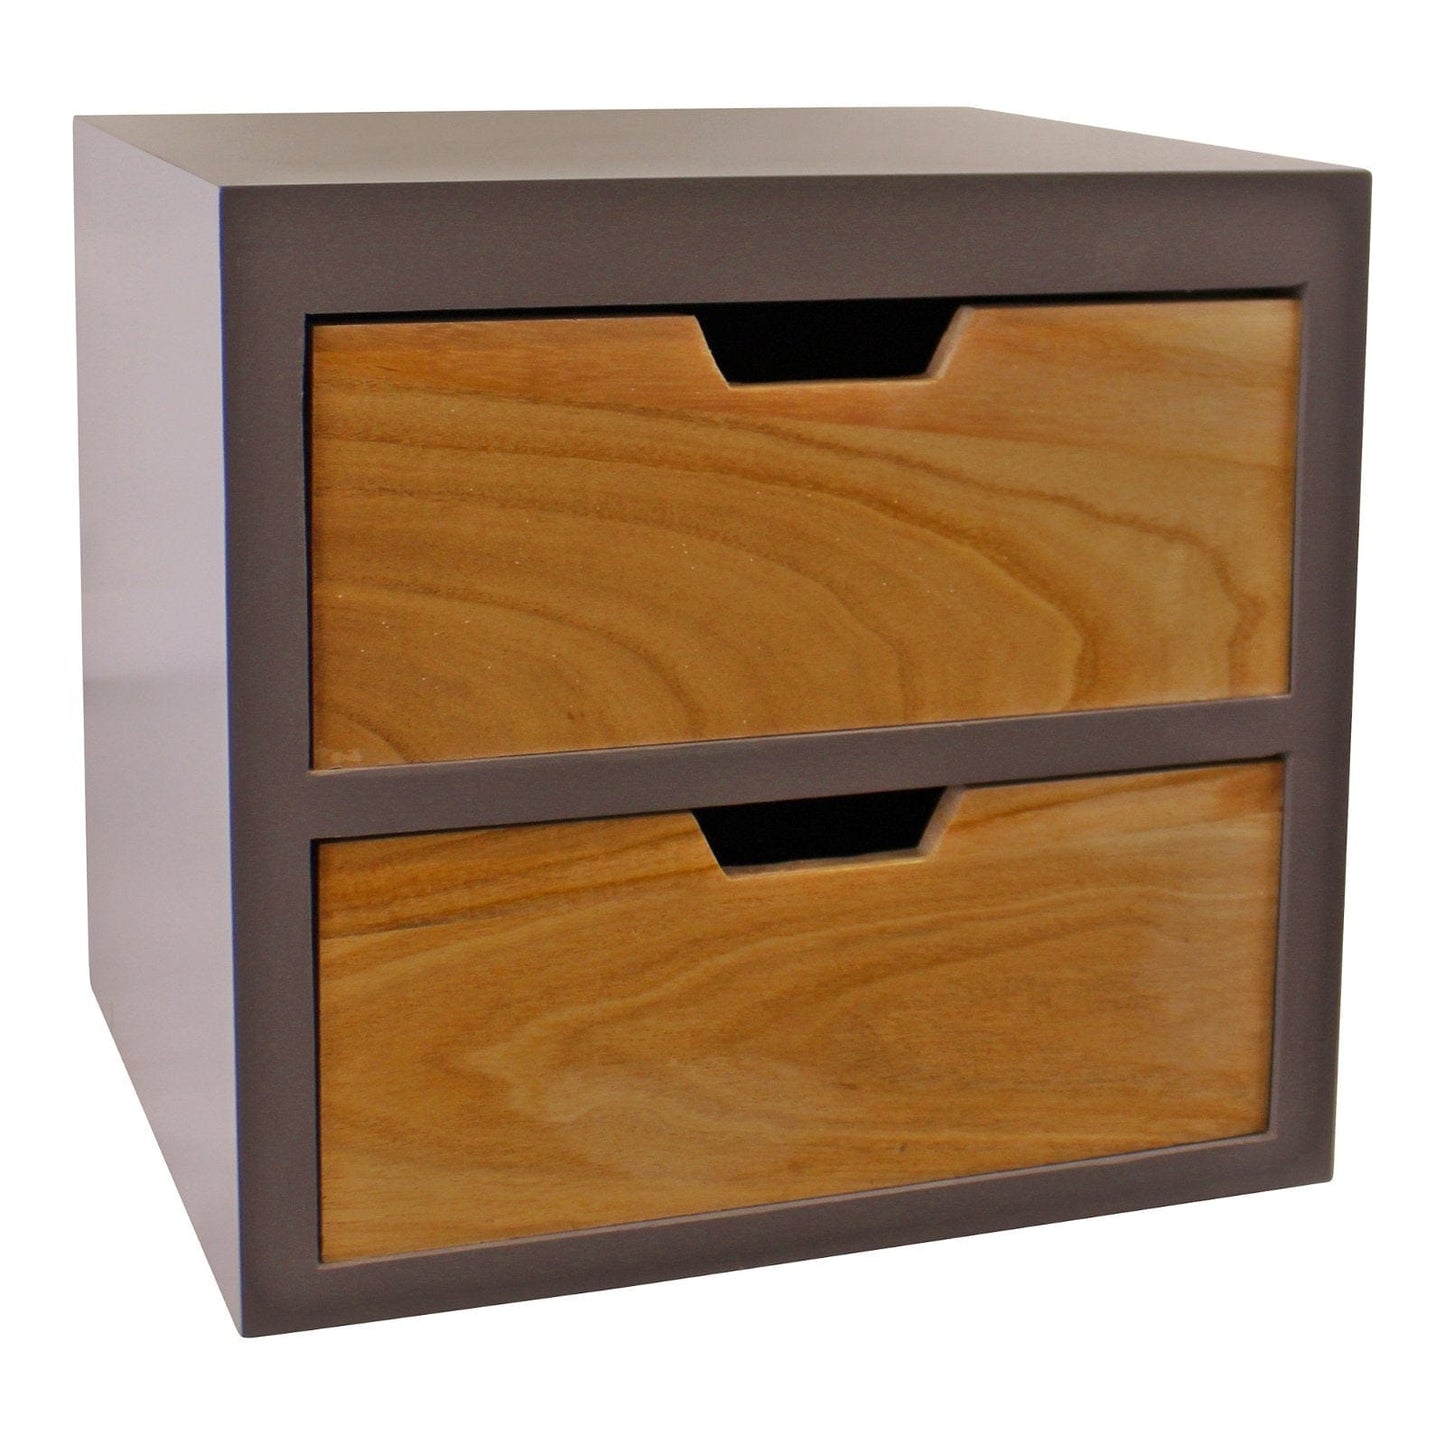 2 Drawer Chest In Grey Finish With Natural Drawers & Removable Legs - Kaftan direct